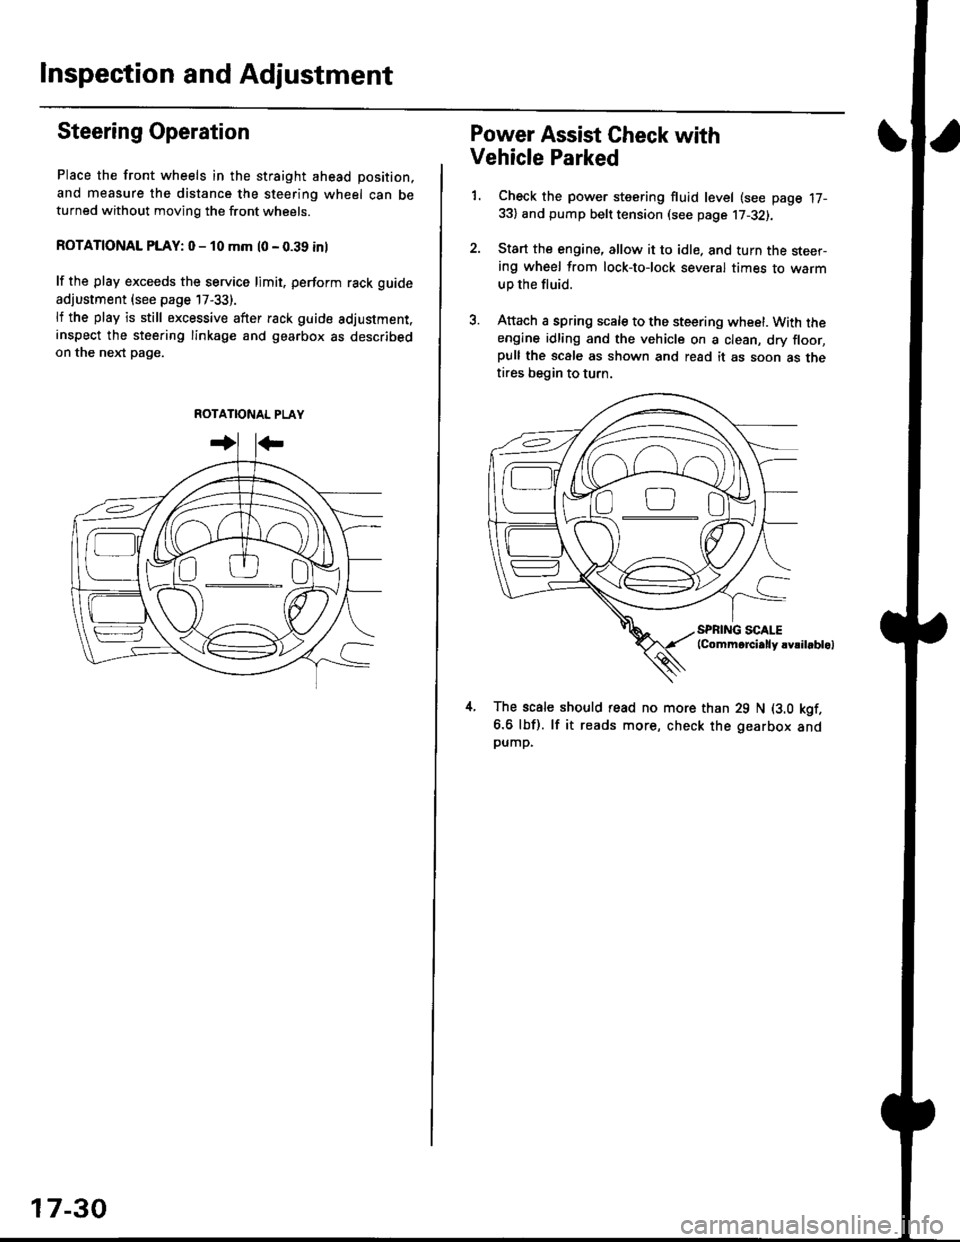 HONDA CIVIC 1996 6.G Workshop Manual Inspection and Adjustment
Steering Operation
Place the front wheels in the straight ahead position,
and measure the distance the steering wheel can beturned without moving the front wheels.
ROTATIONAL